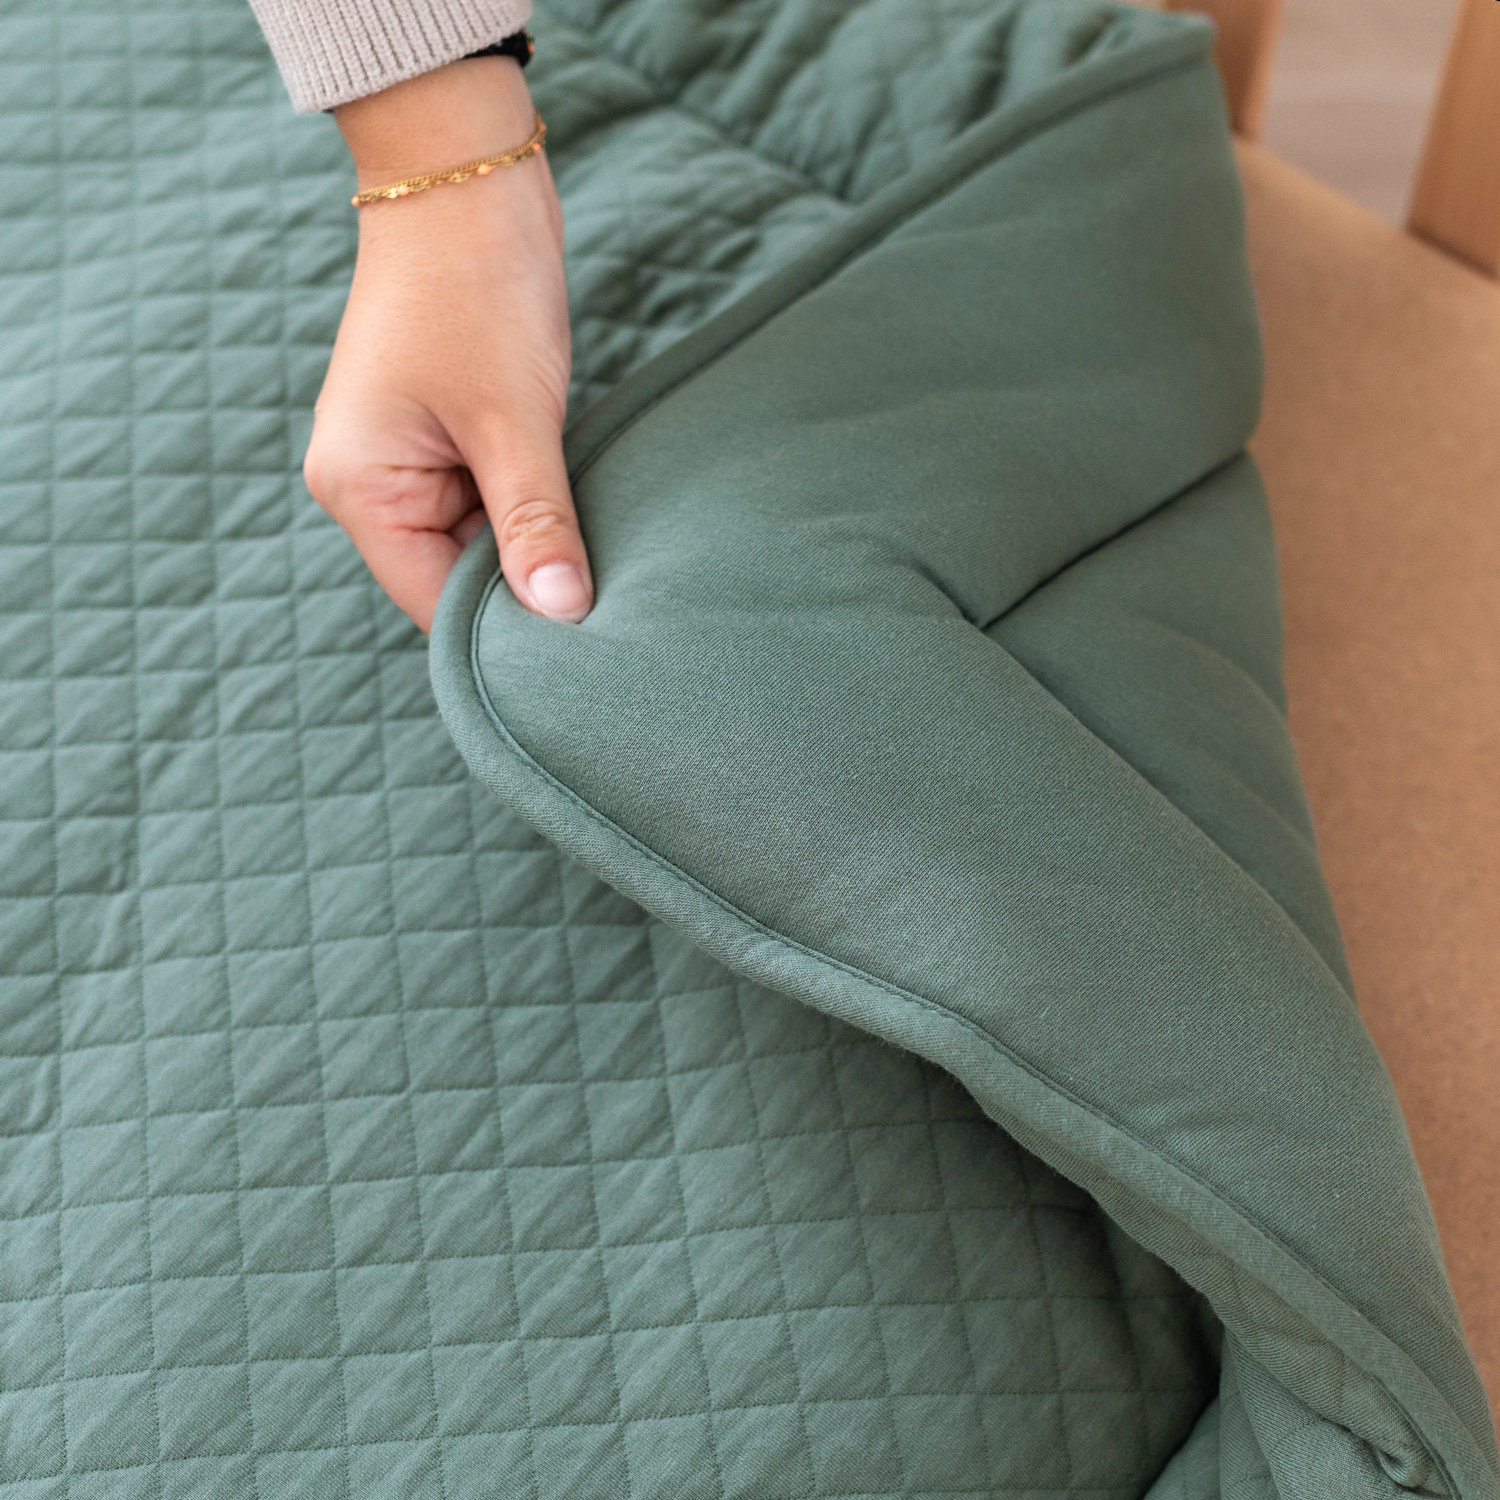 Parklegger Pady quilted jersey 100x100cm QUILT Green